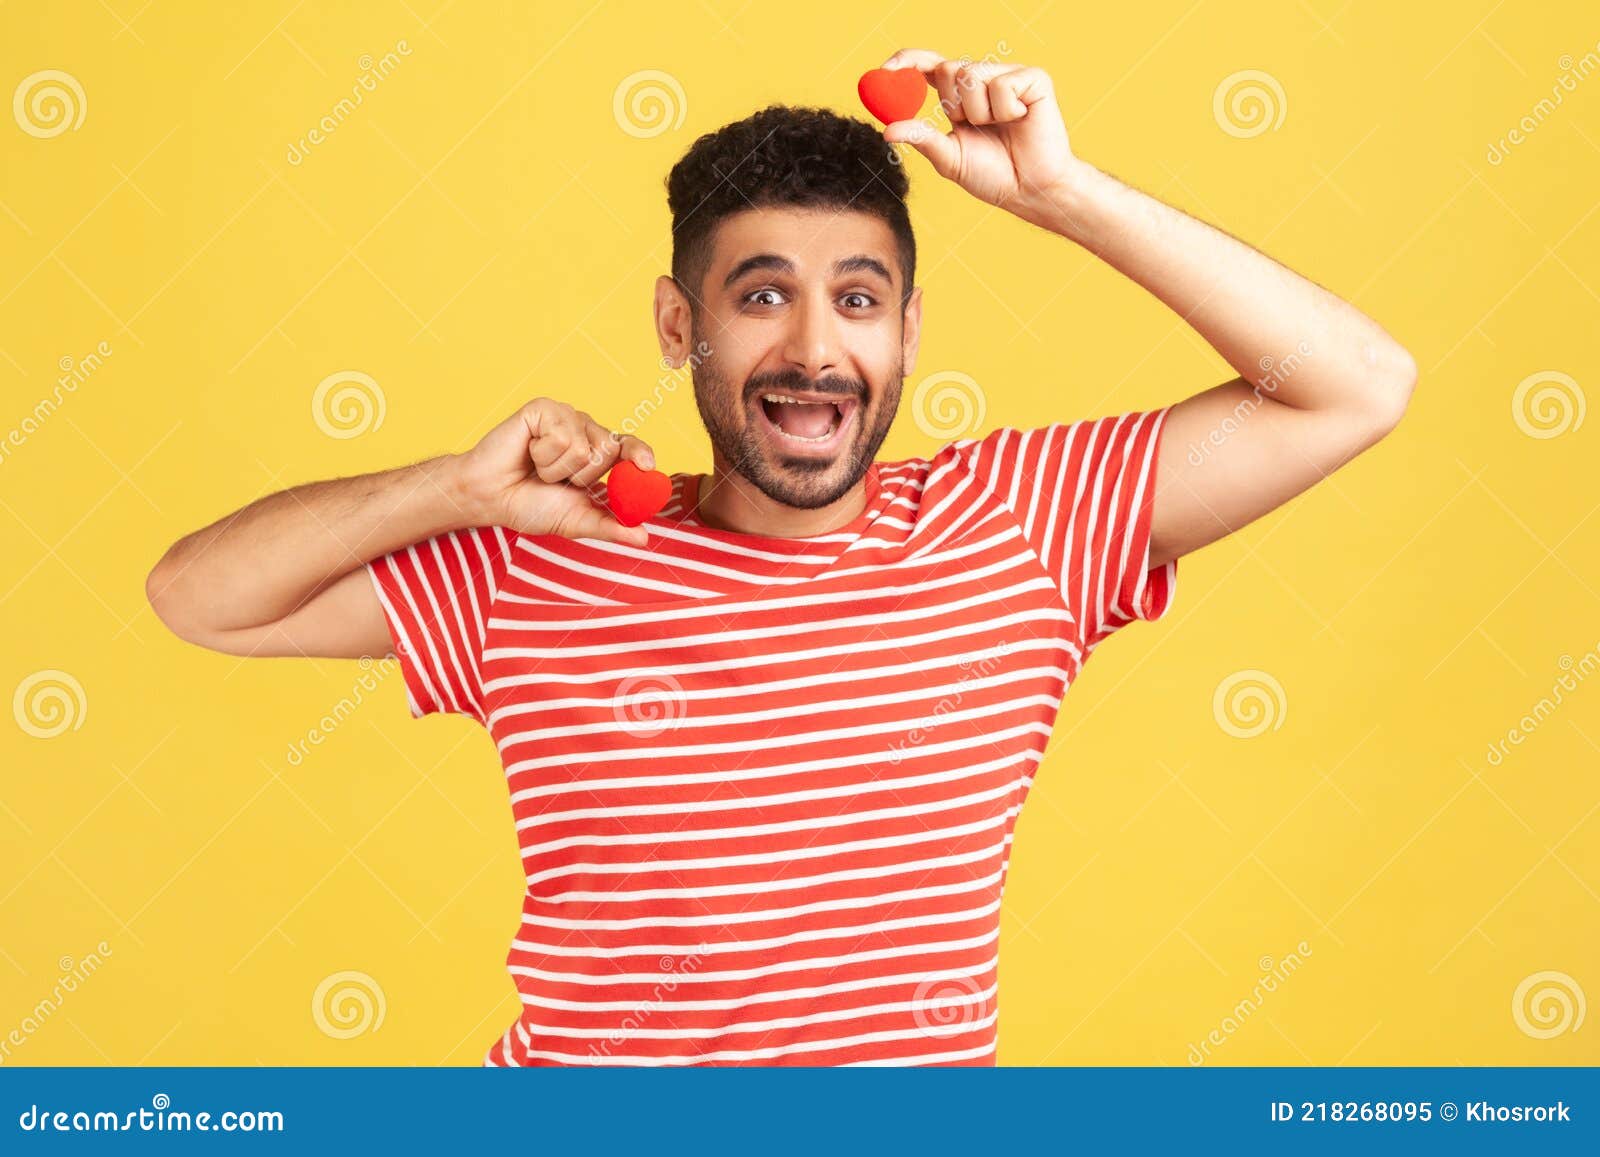 positive excited bearded man in striped t-shirt fooling around having fun with red toy hearts, showing his fondness and devotion,